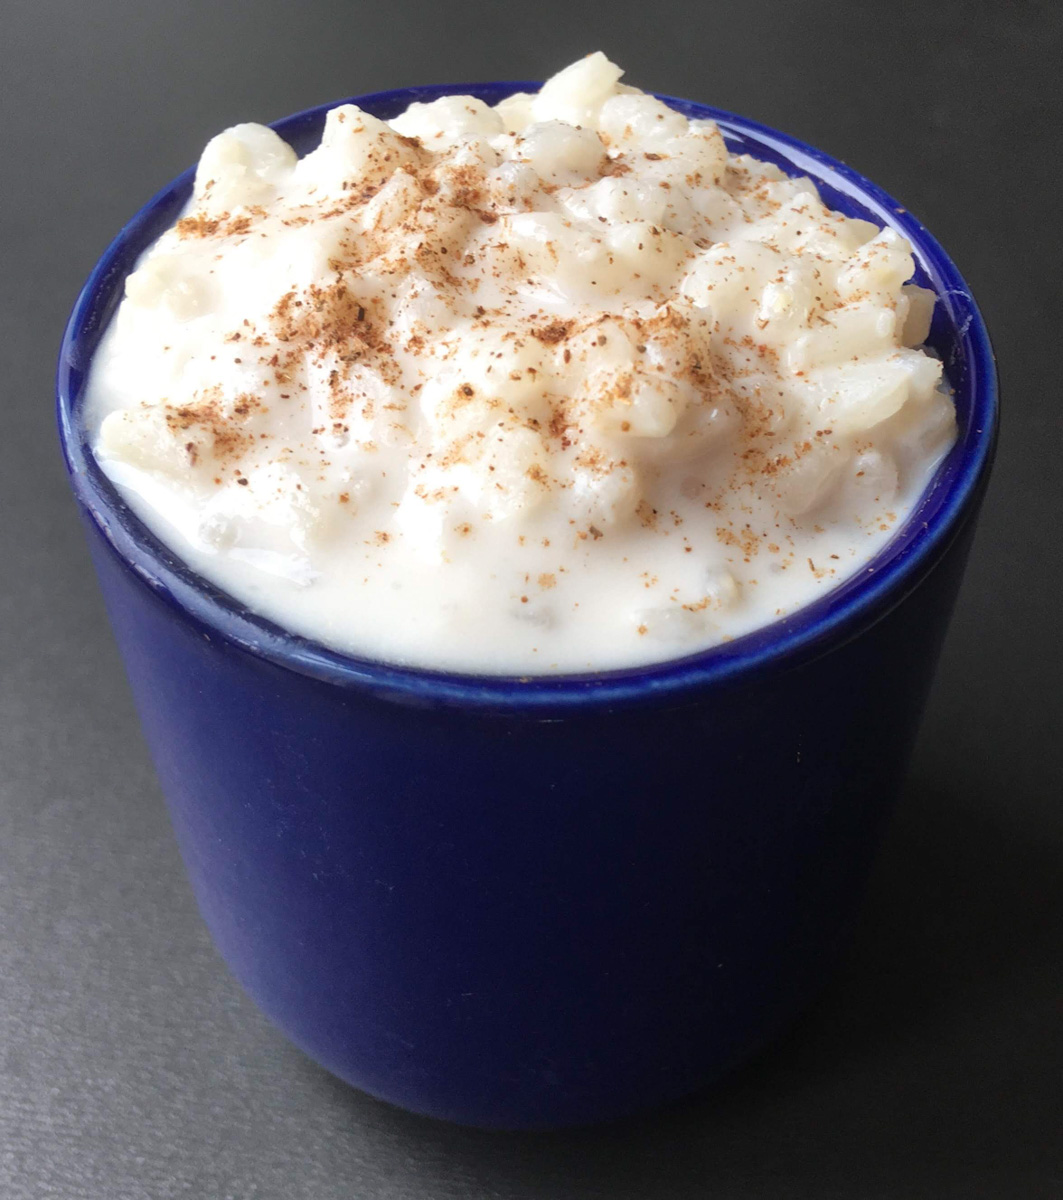 a blue cup filled with rice pudding with cinnamon sprinkled on top